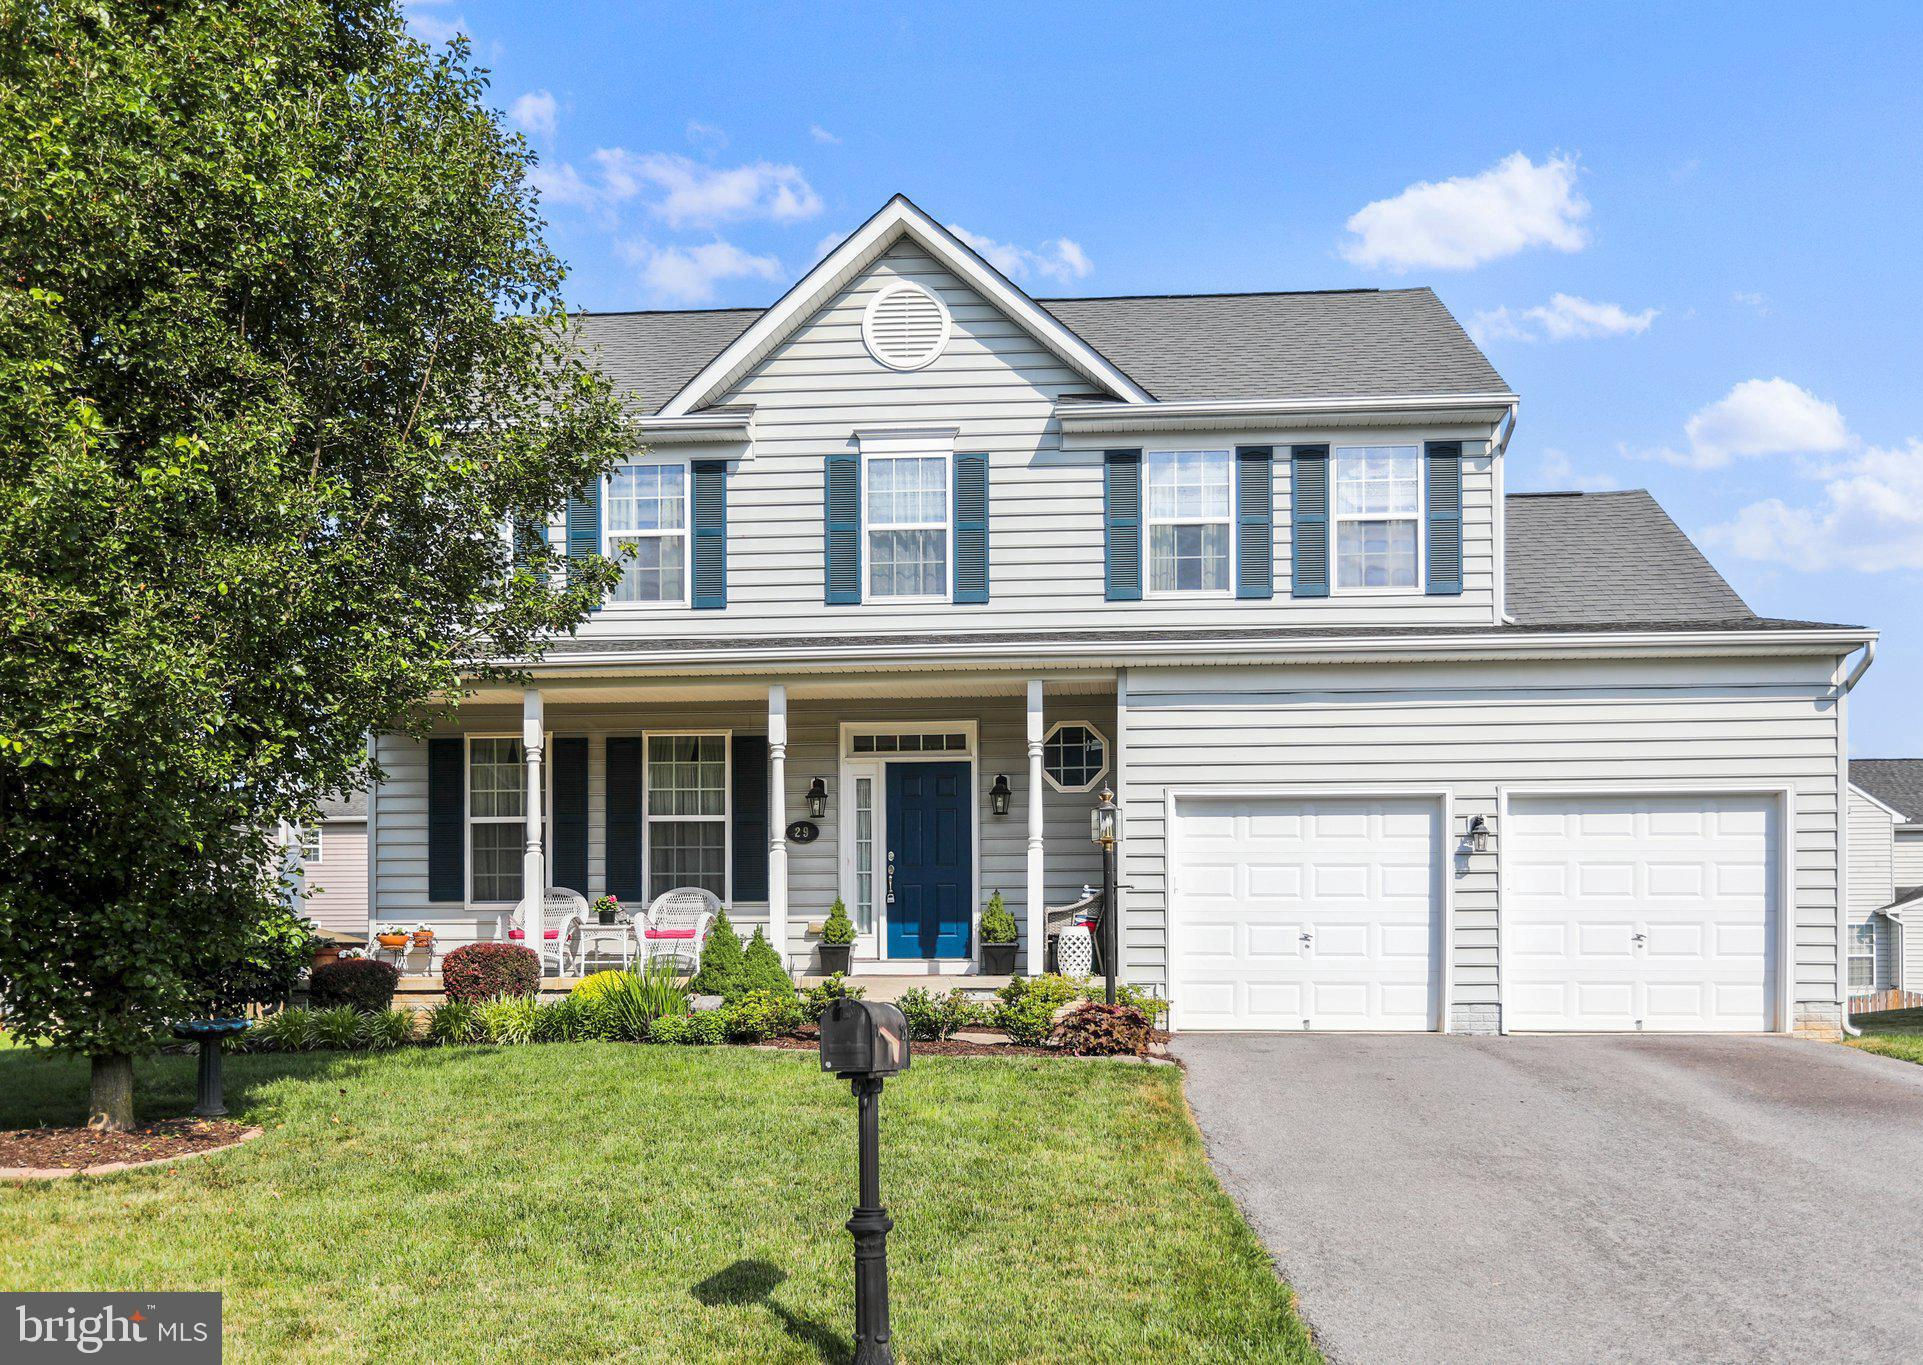 29 Thorton Hall Road, Kearneysville, WV 25430 is now new to the market!